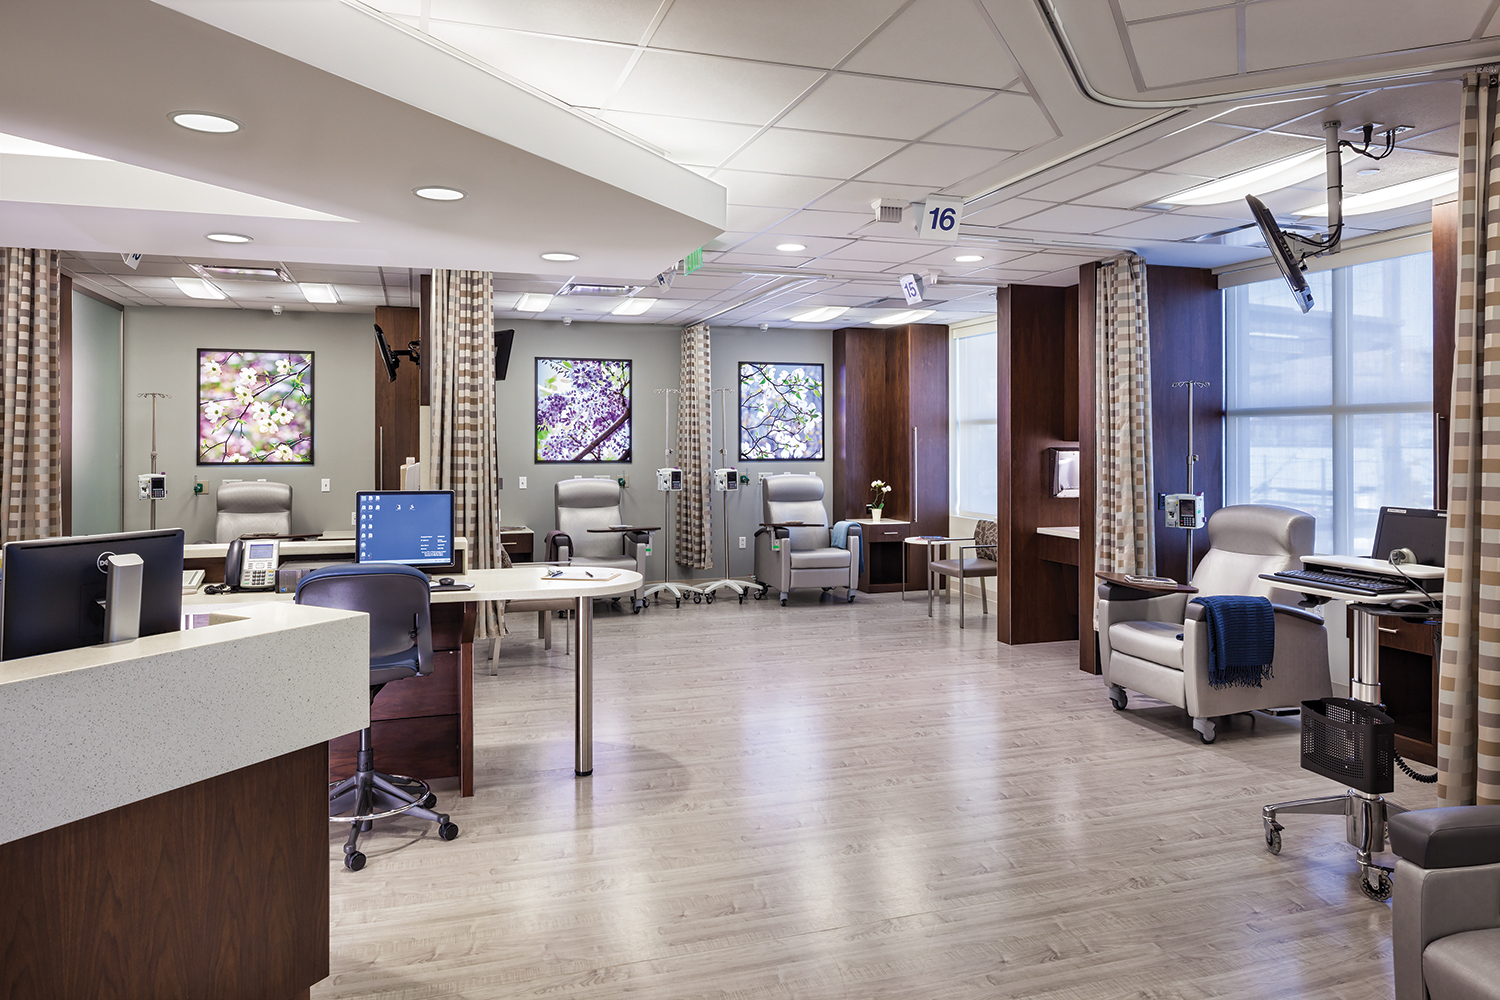 Unity medical lighting illuminates an infusion center with multiple patient seats and a nurse's station.